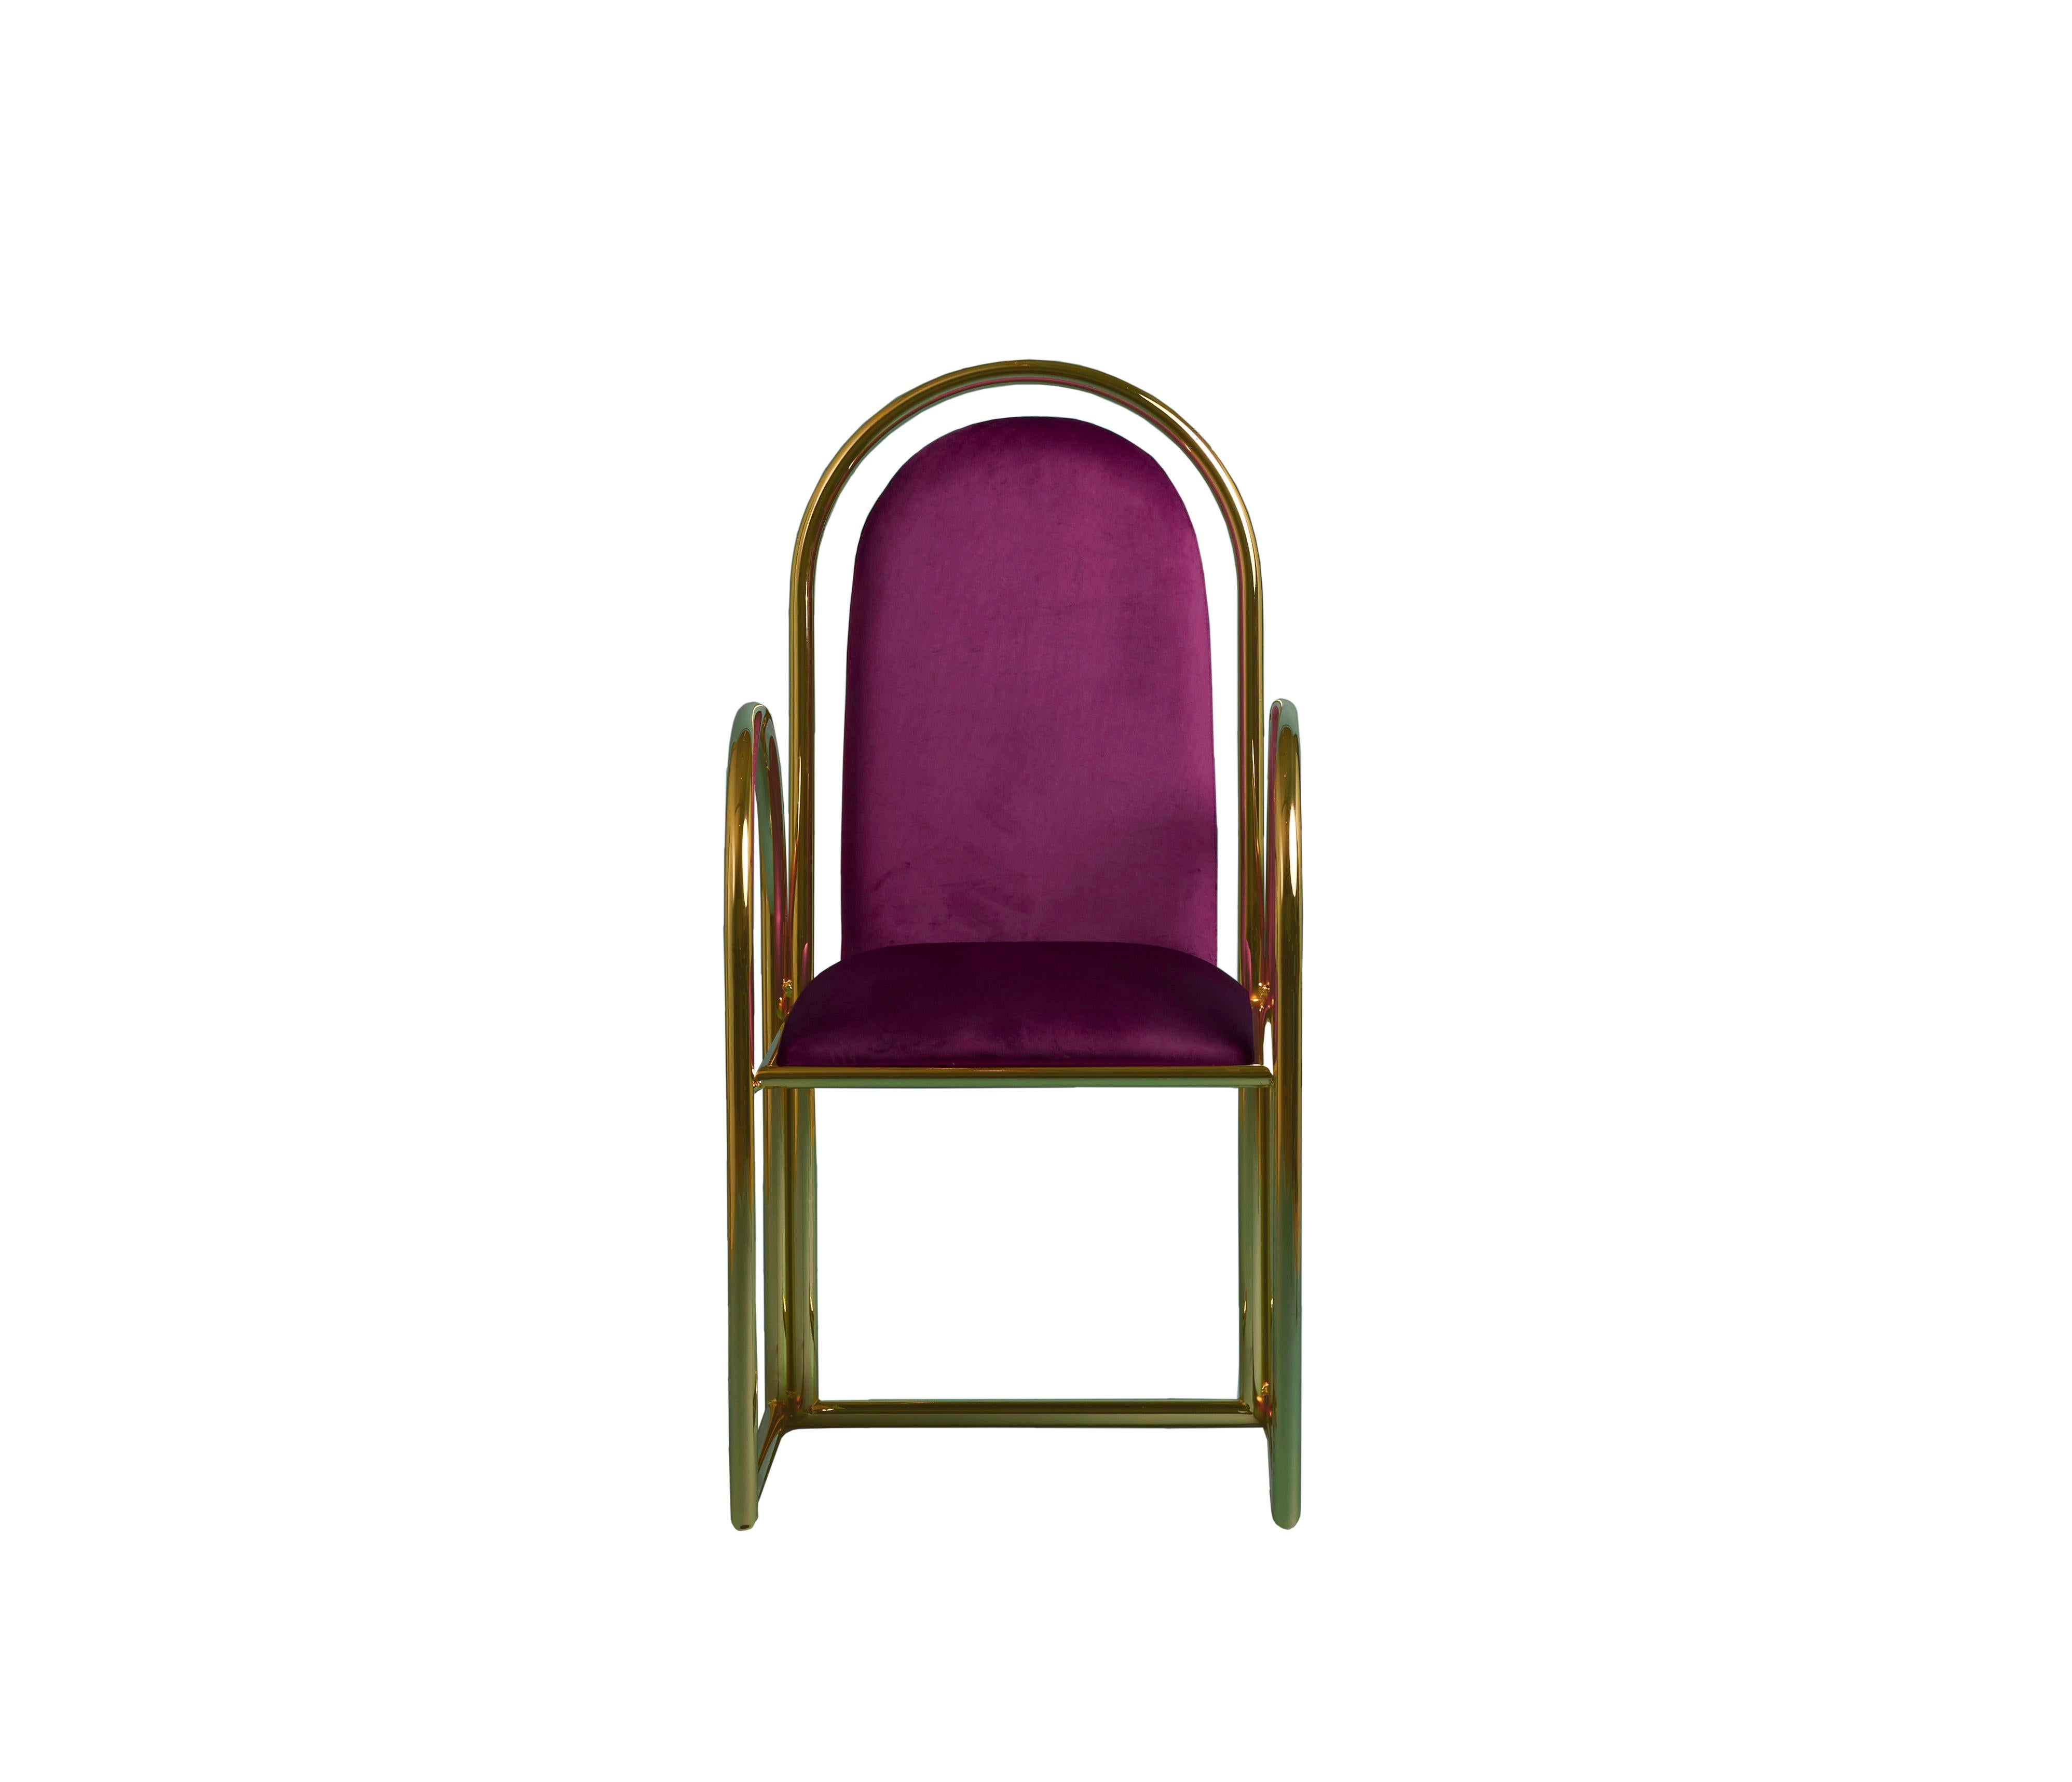 Modern Set of 2 Arco Chairs by Houtique